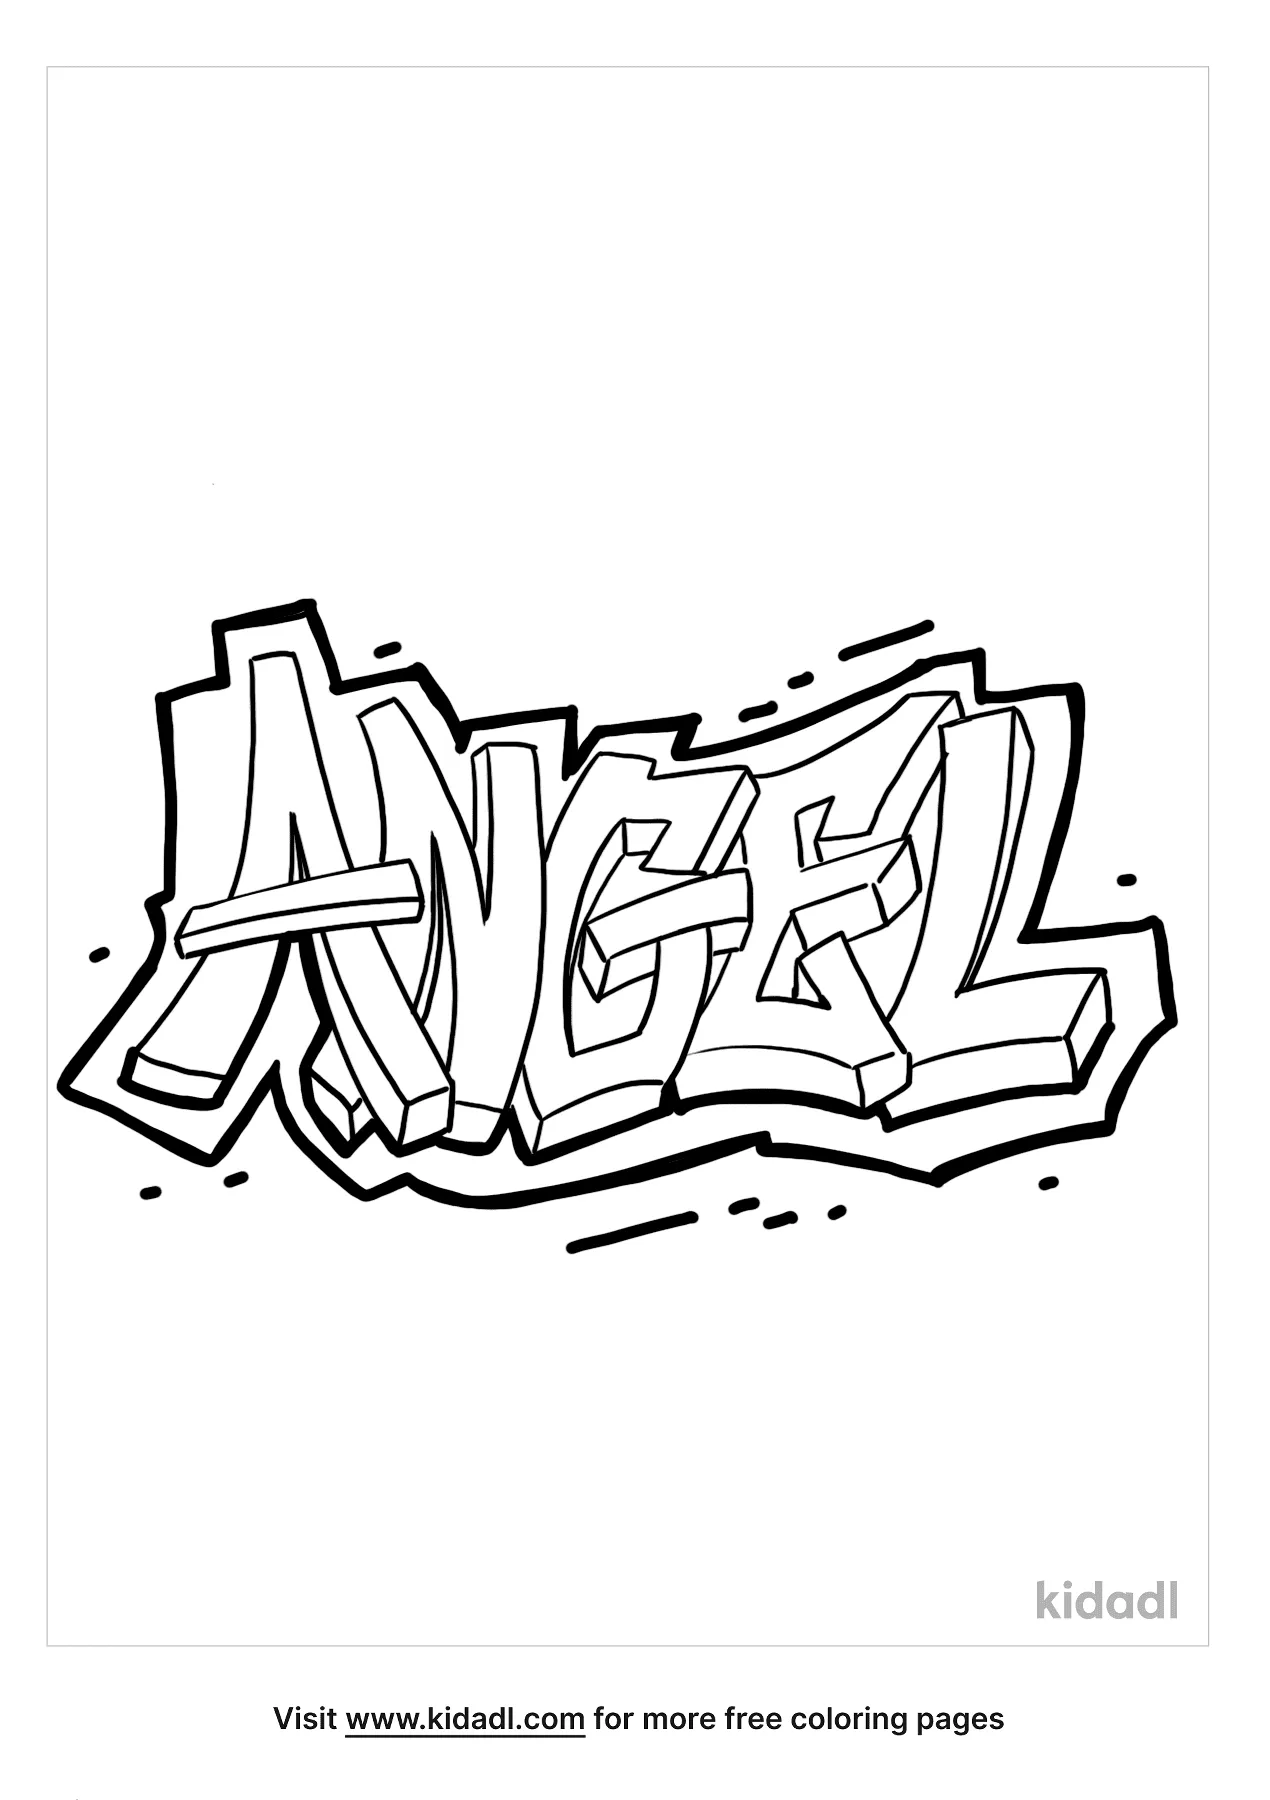 graffiti coloring pages free words and quotes coloring pages kidadl